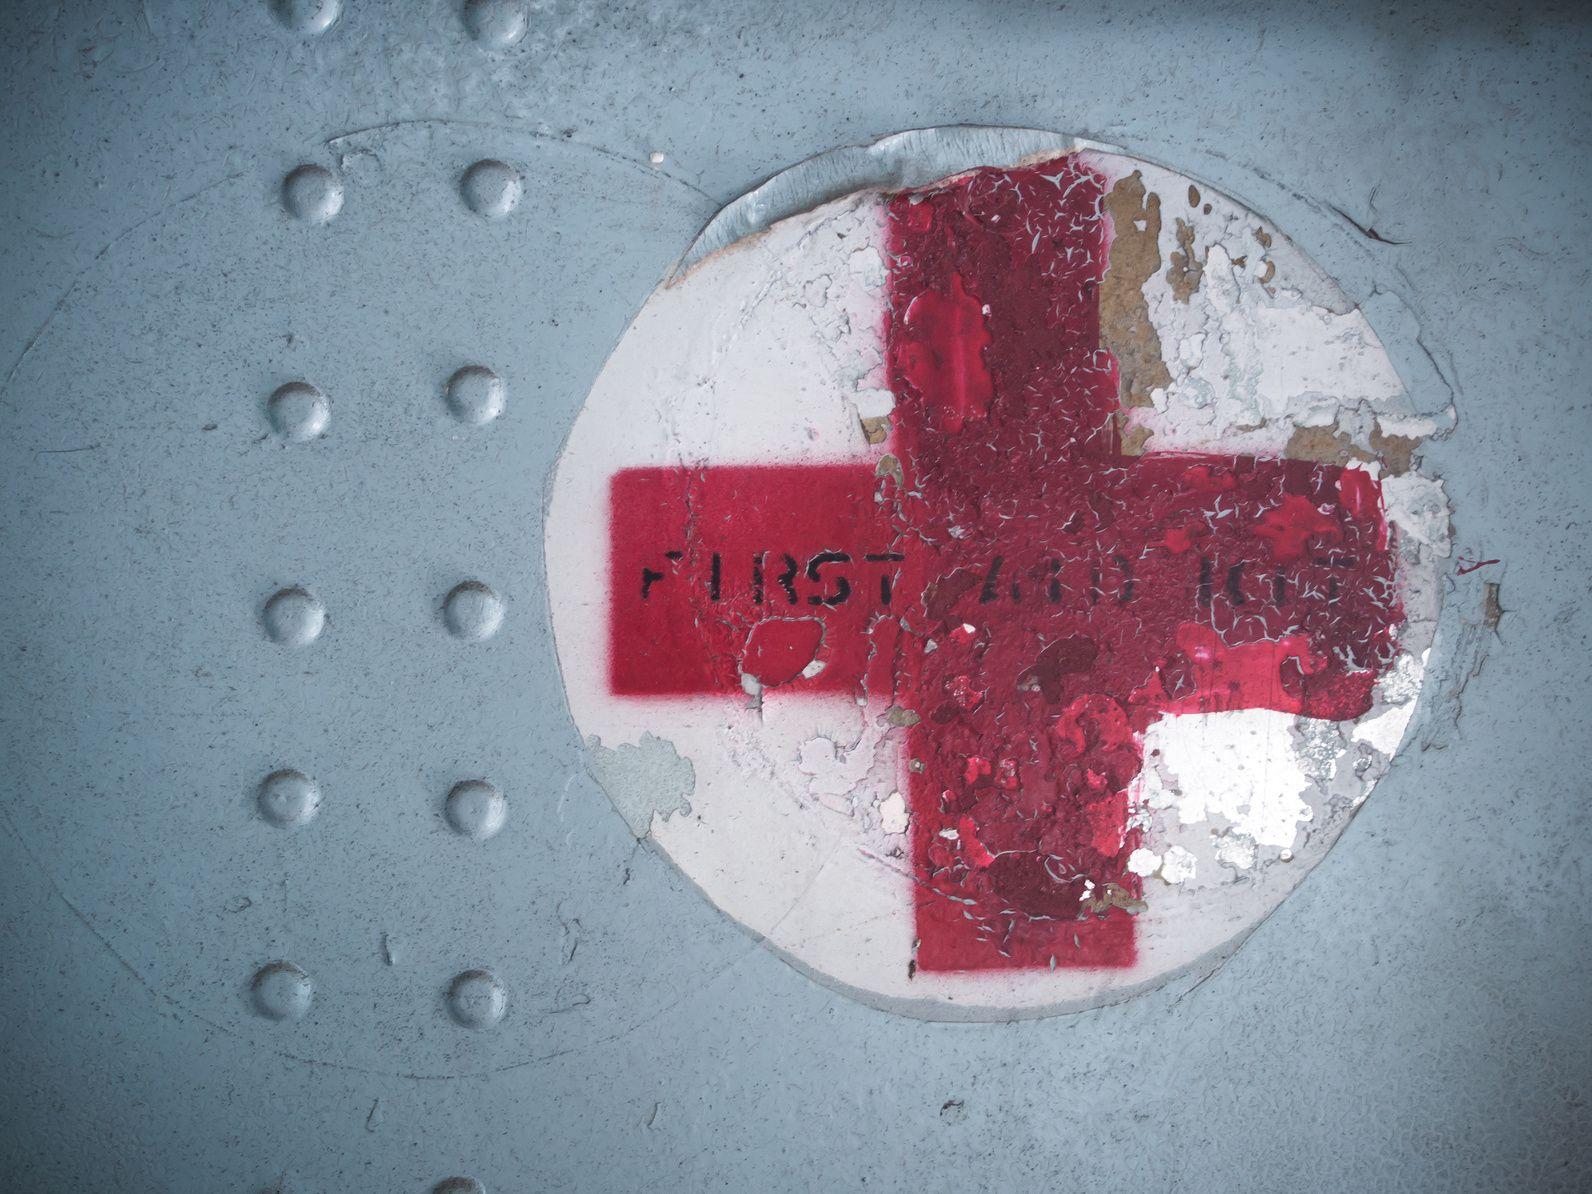 Military Medical Cross Logo - Applying a Medical Background to Humanitarian Aid | Fusion ...